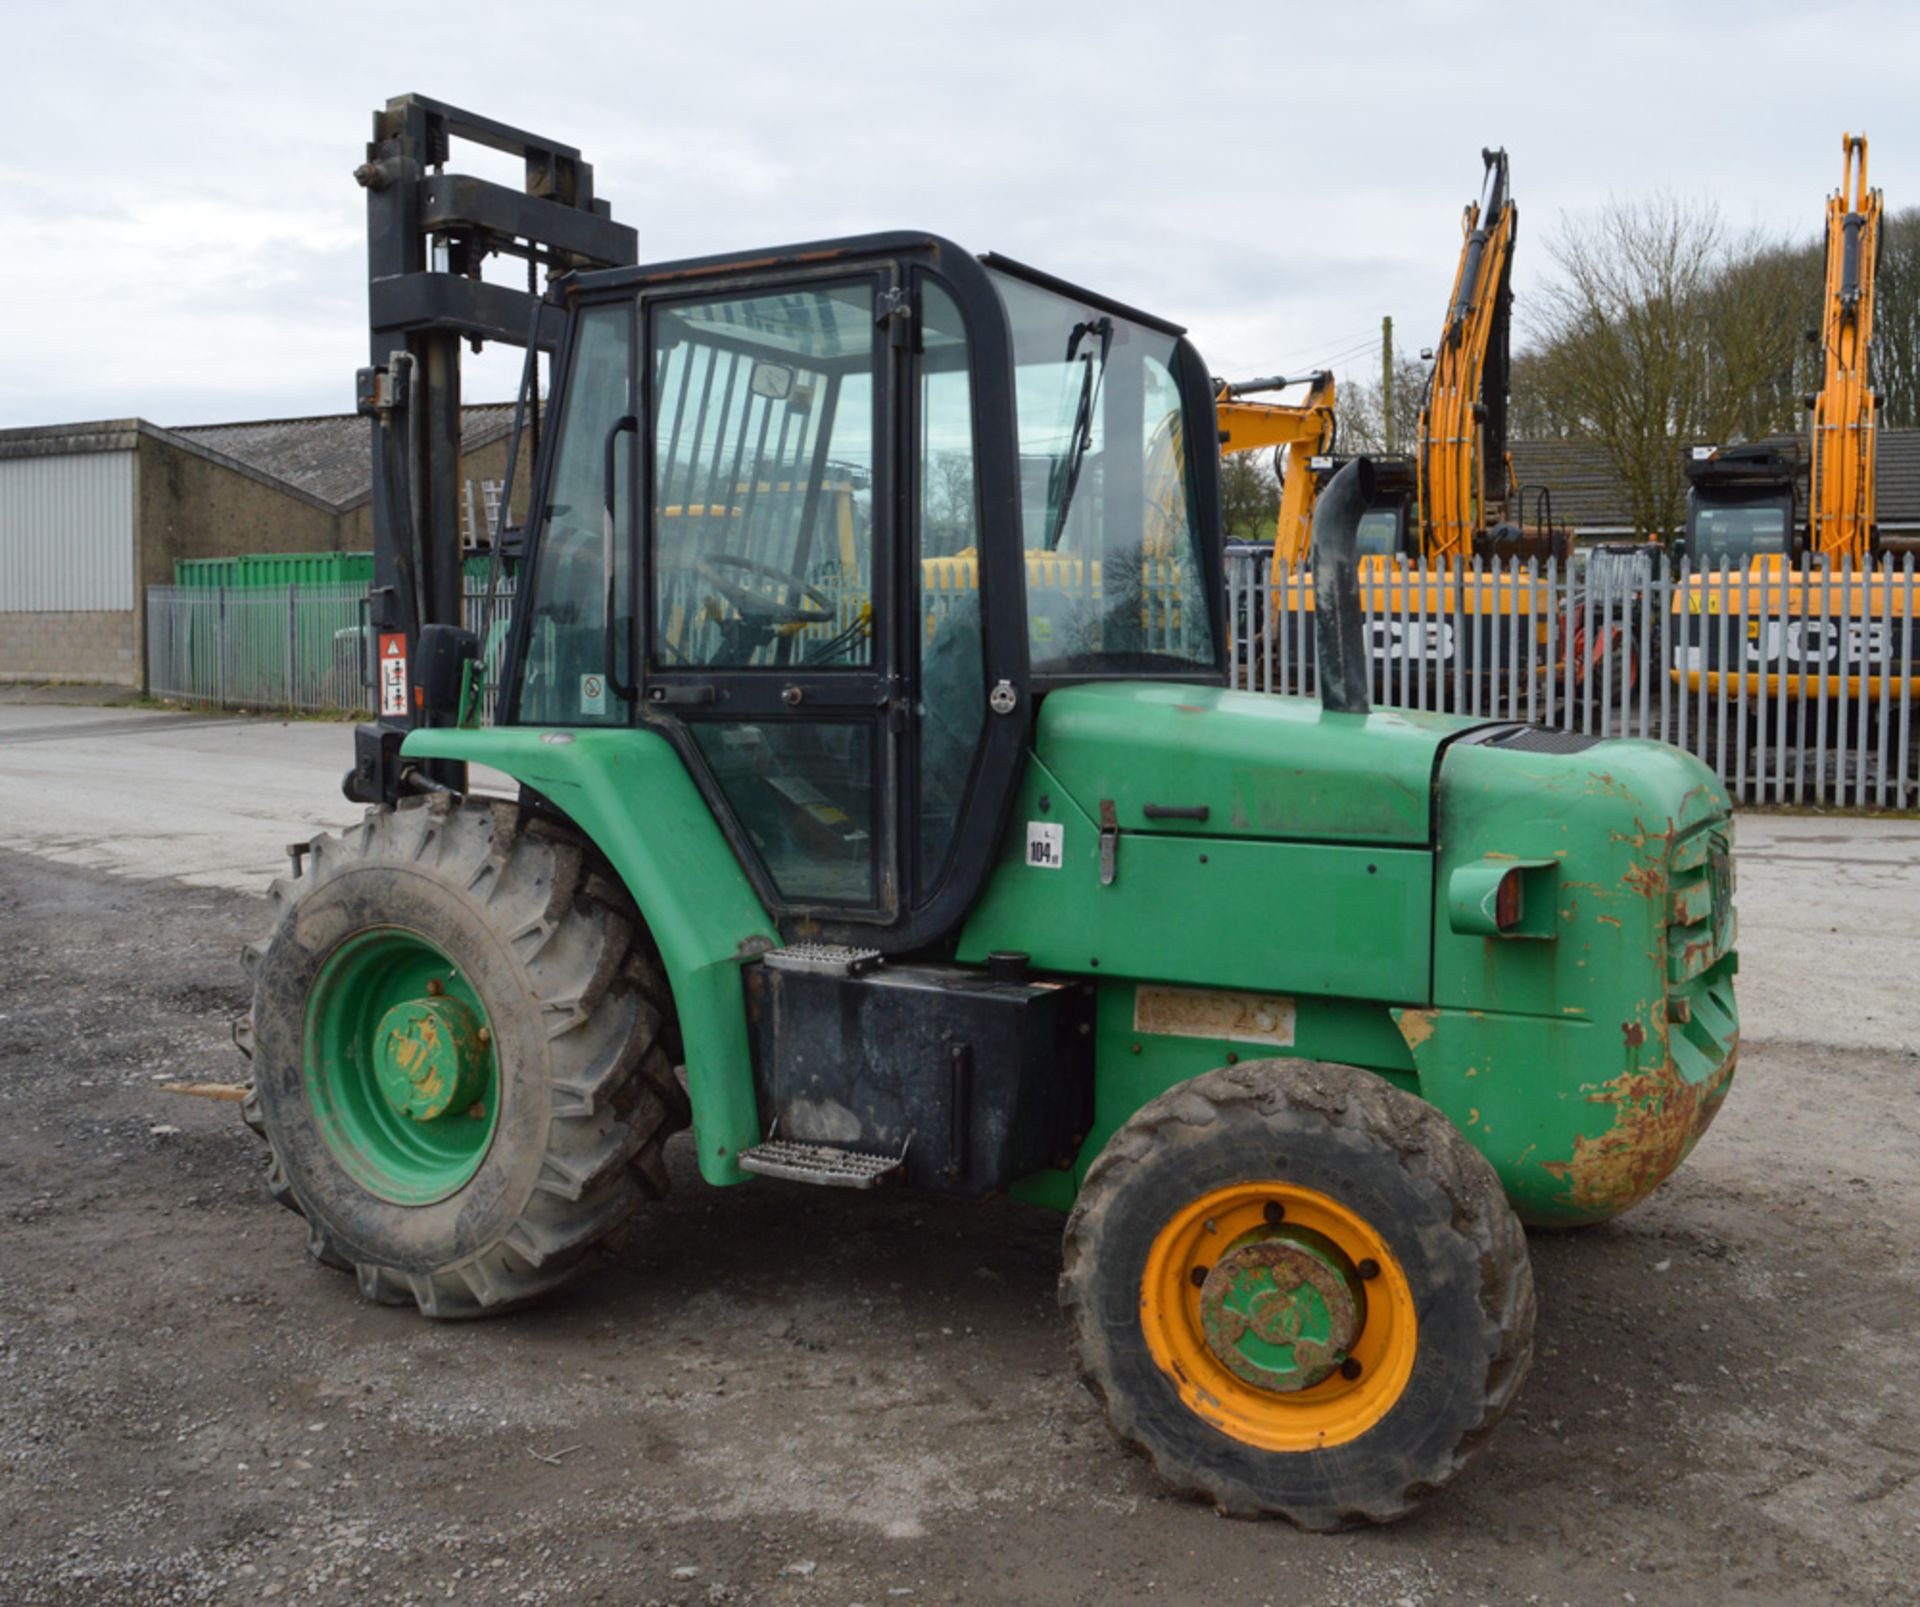 JCB 926 rough terrain forklift truck Year: 2005 S/N: 0824414 Recorded Hours: 4798 - Image 2 of 8